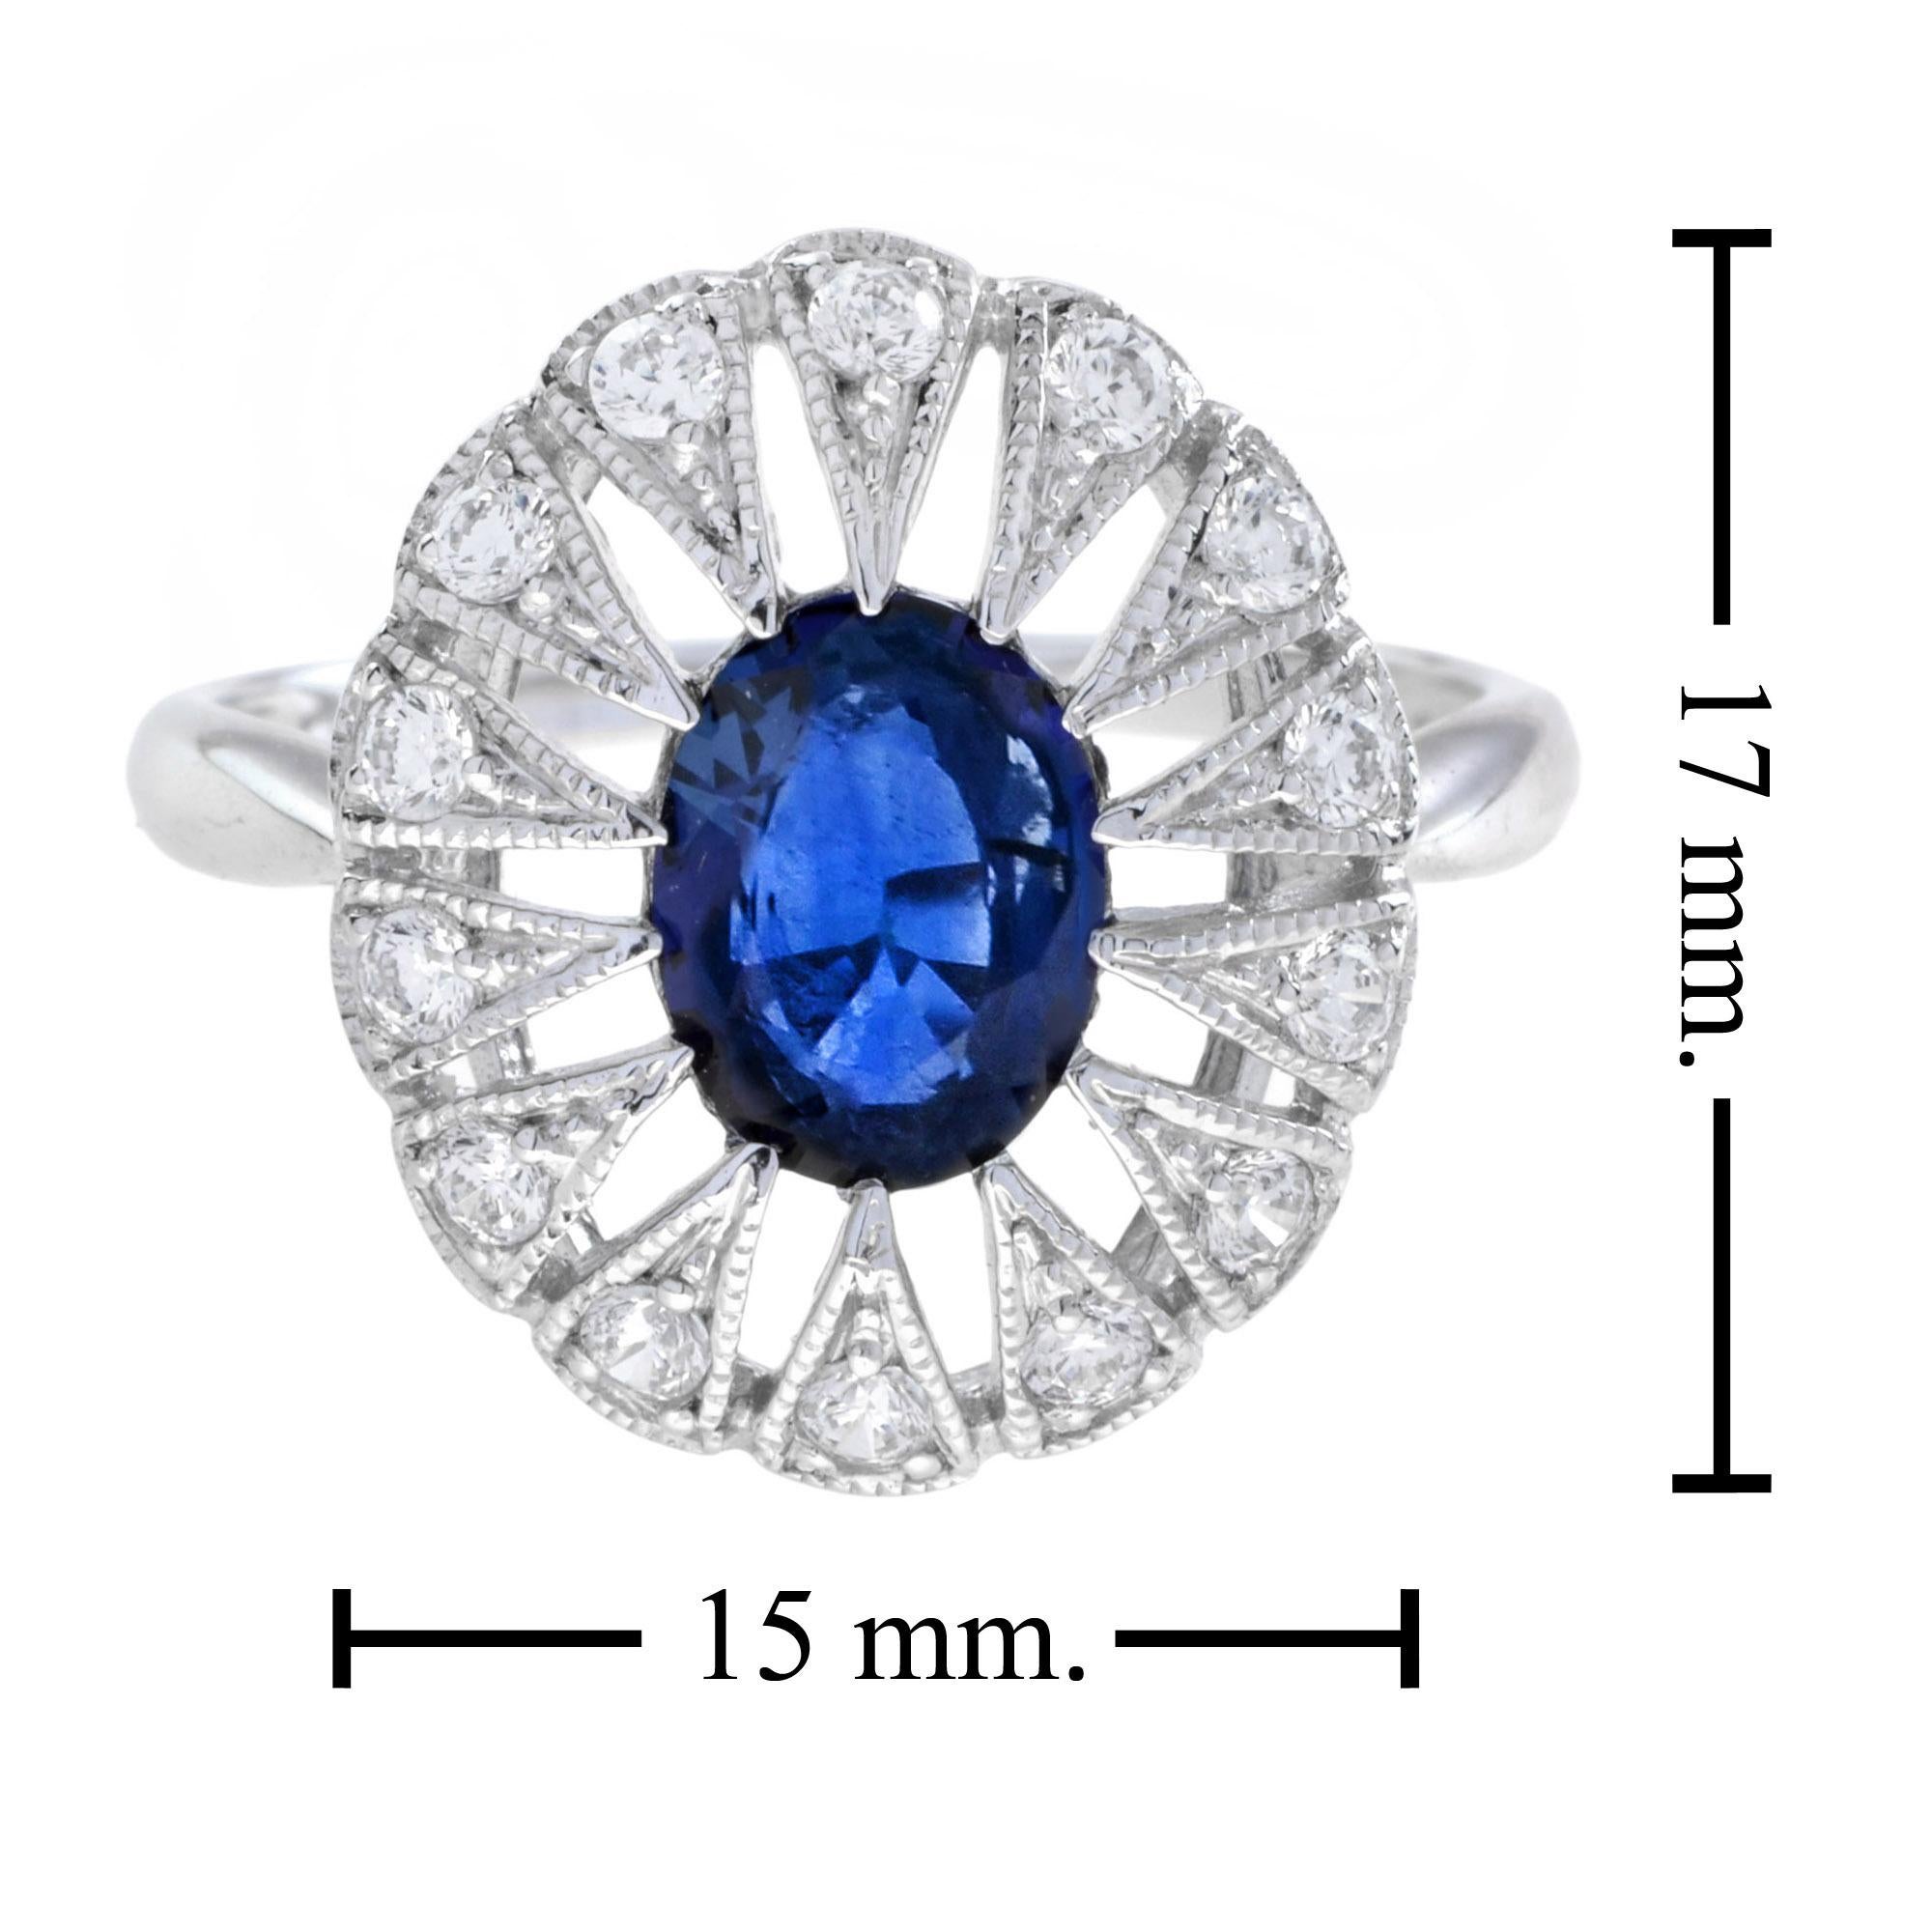 For Sale:  Oval Ceylon Sapphire with Diamond Open Work Halo Ring in 18K White Gold 6